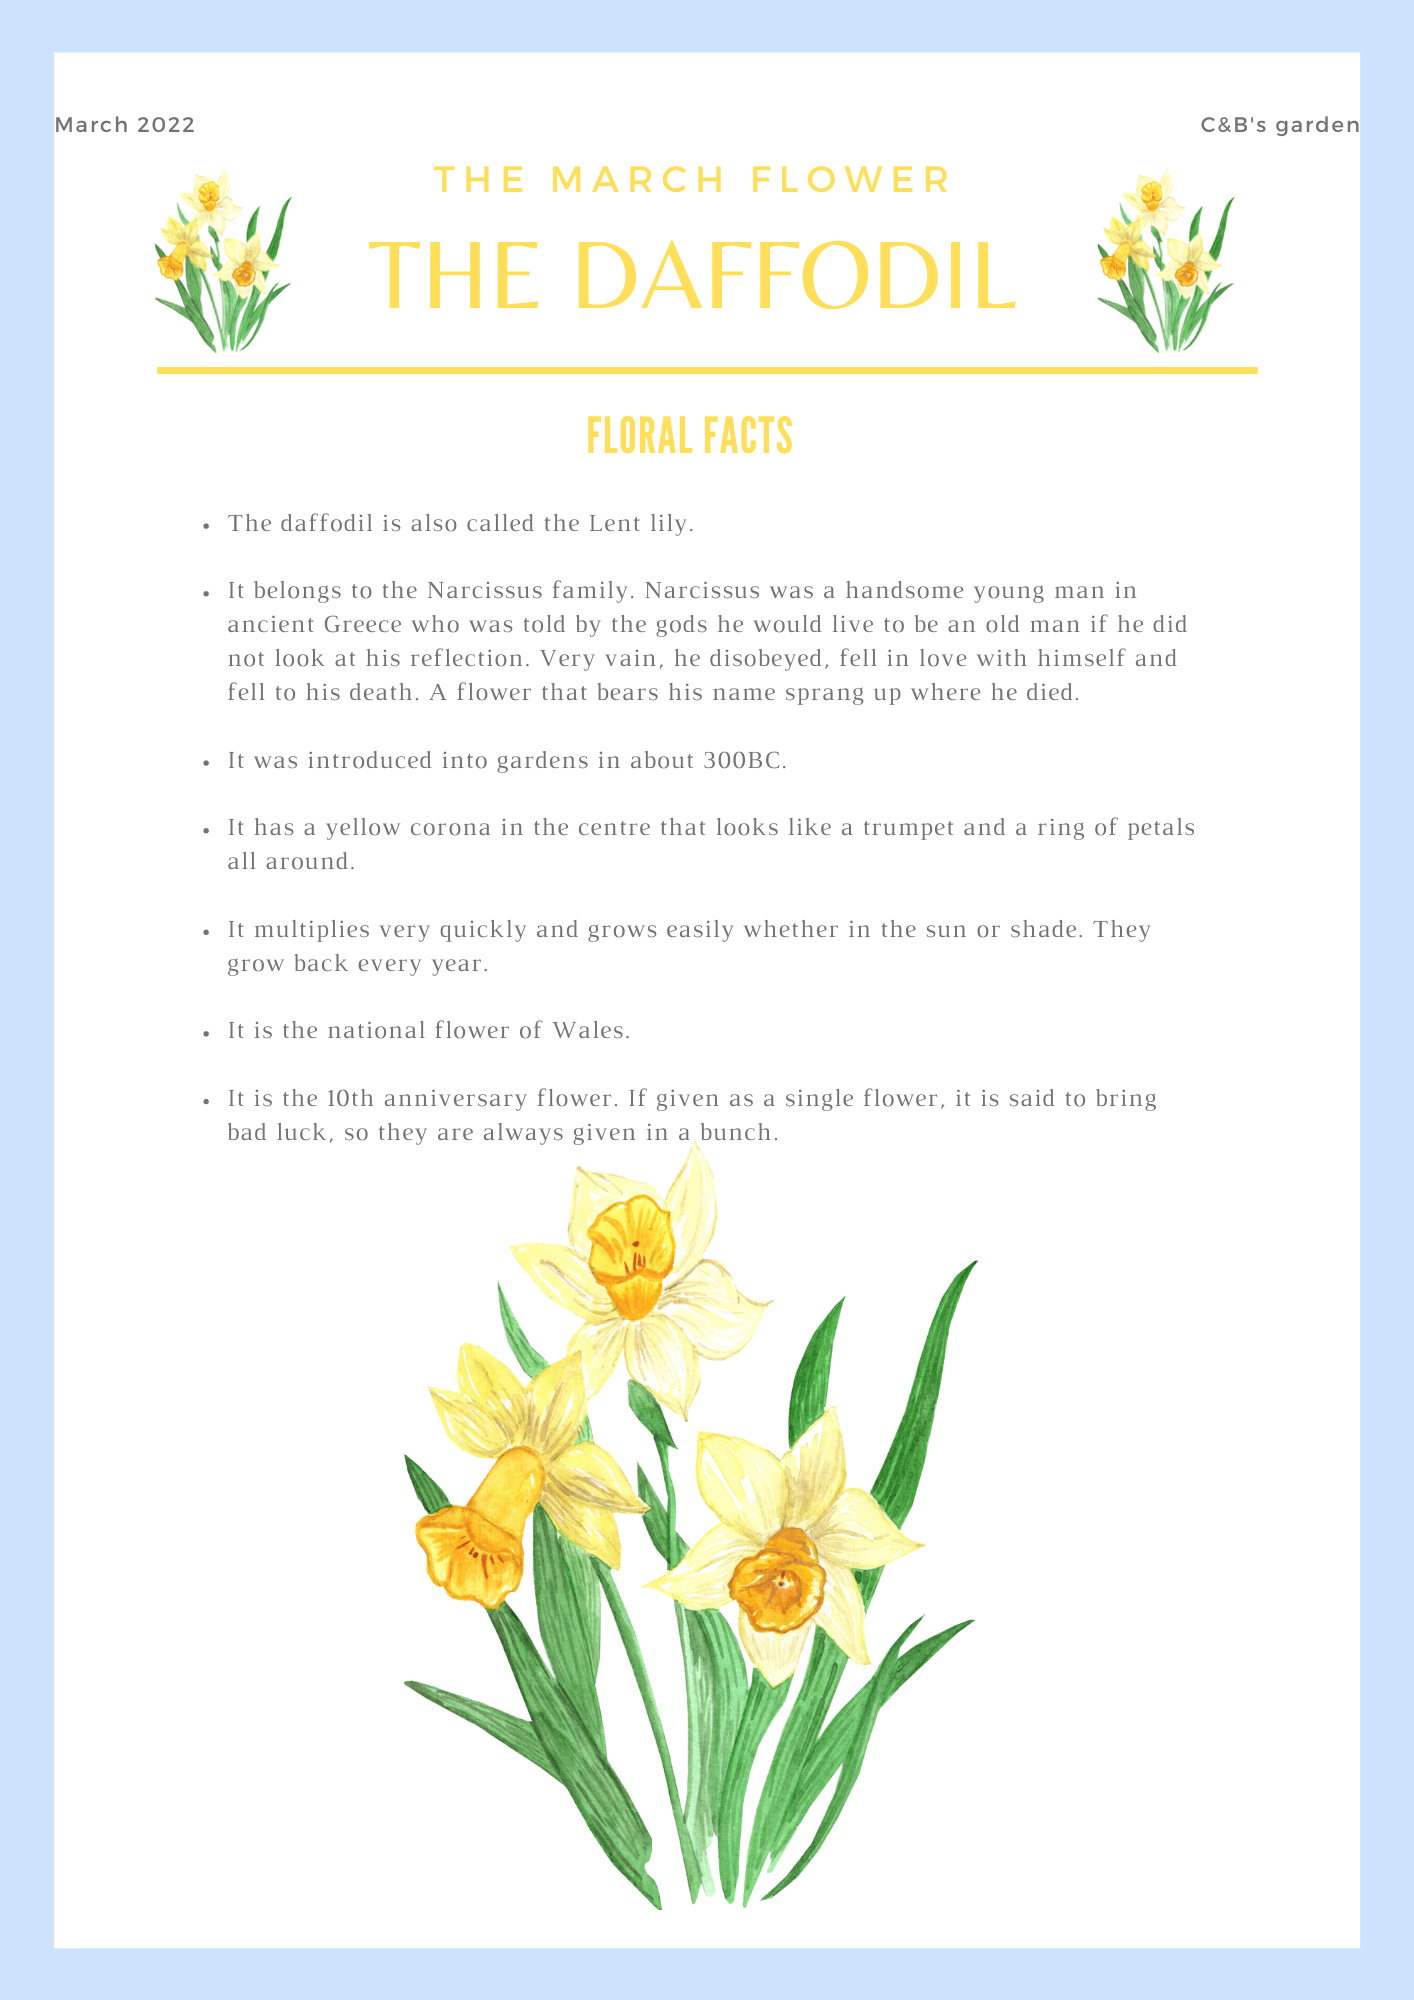 Fun facts about flowers for children - Learn all about the daffodil - Charlotte and Burlington family club